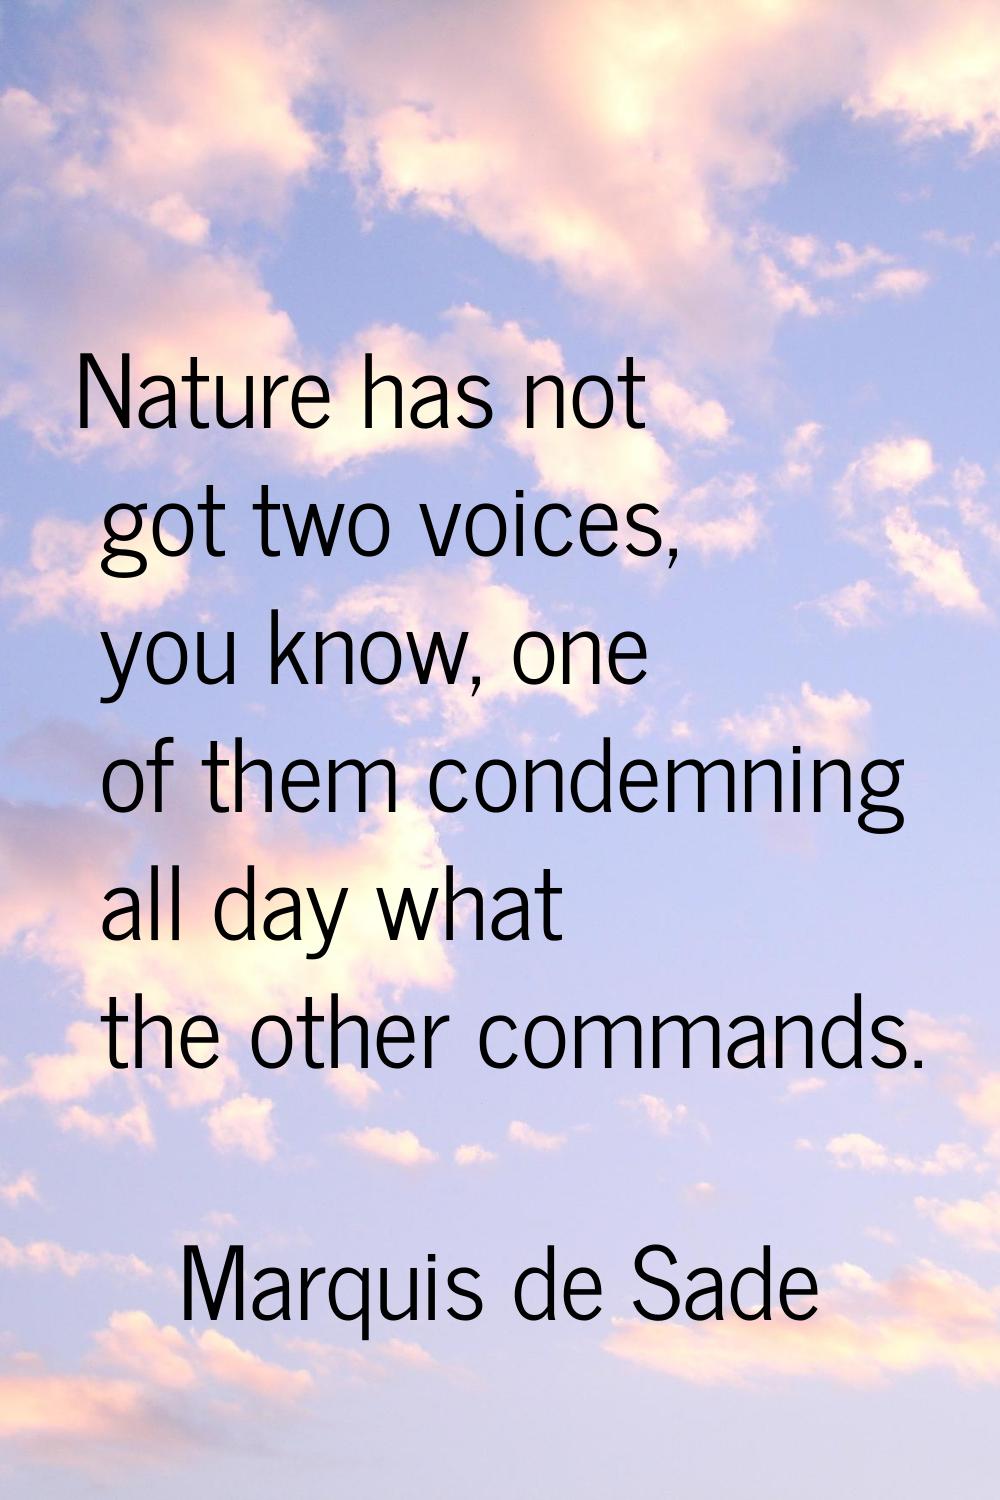 Nature has not got two voices, you know, one of them condemning all day what the other commands.